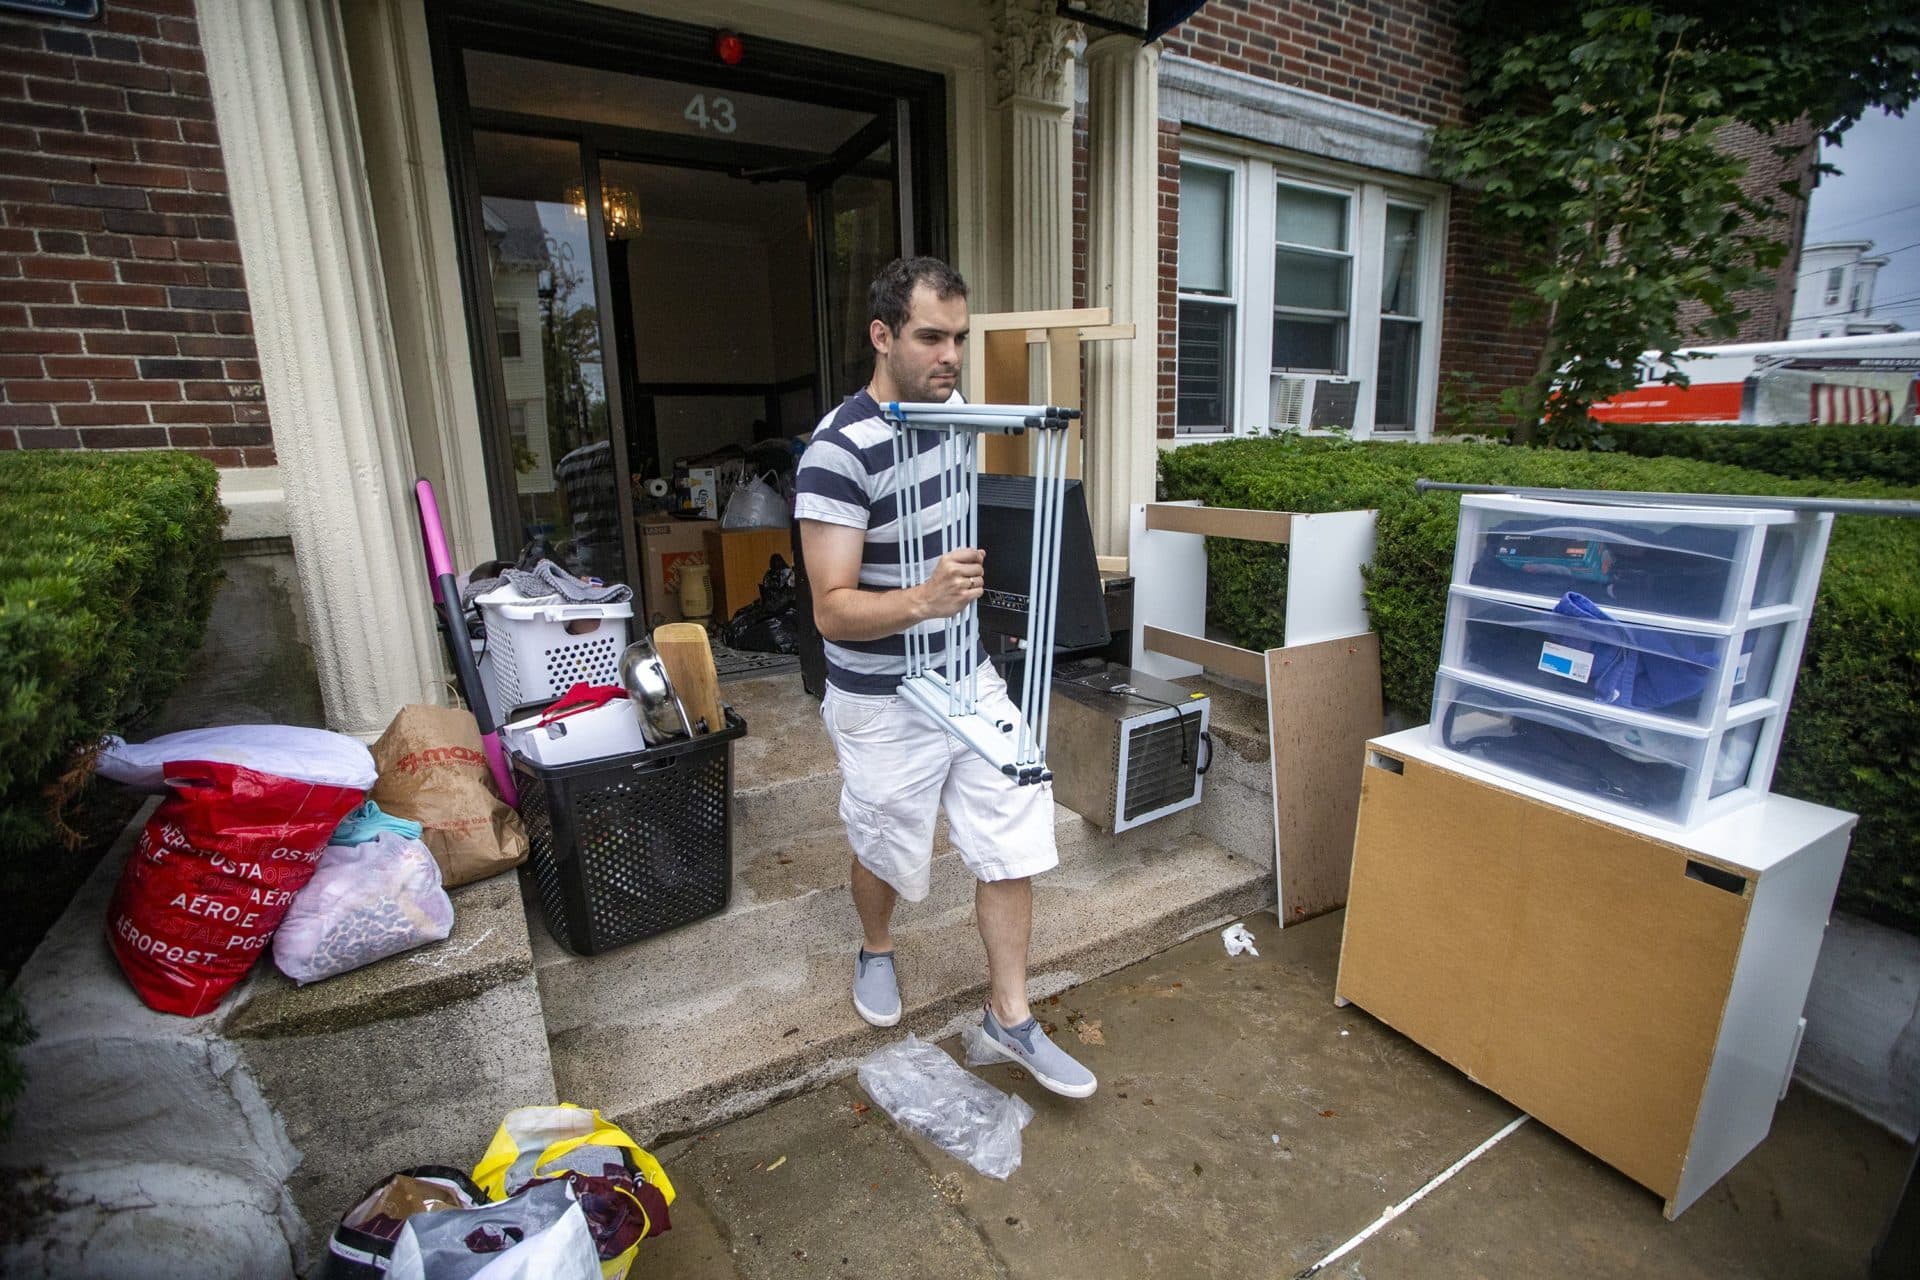 A man moves his belongings out of an apartment building on Linden Street in Allston on Sept. 1. (Jesse Costa/WBUR)